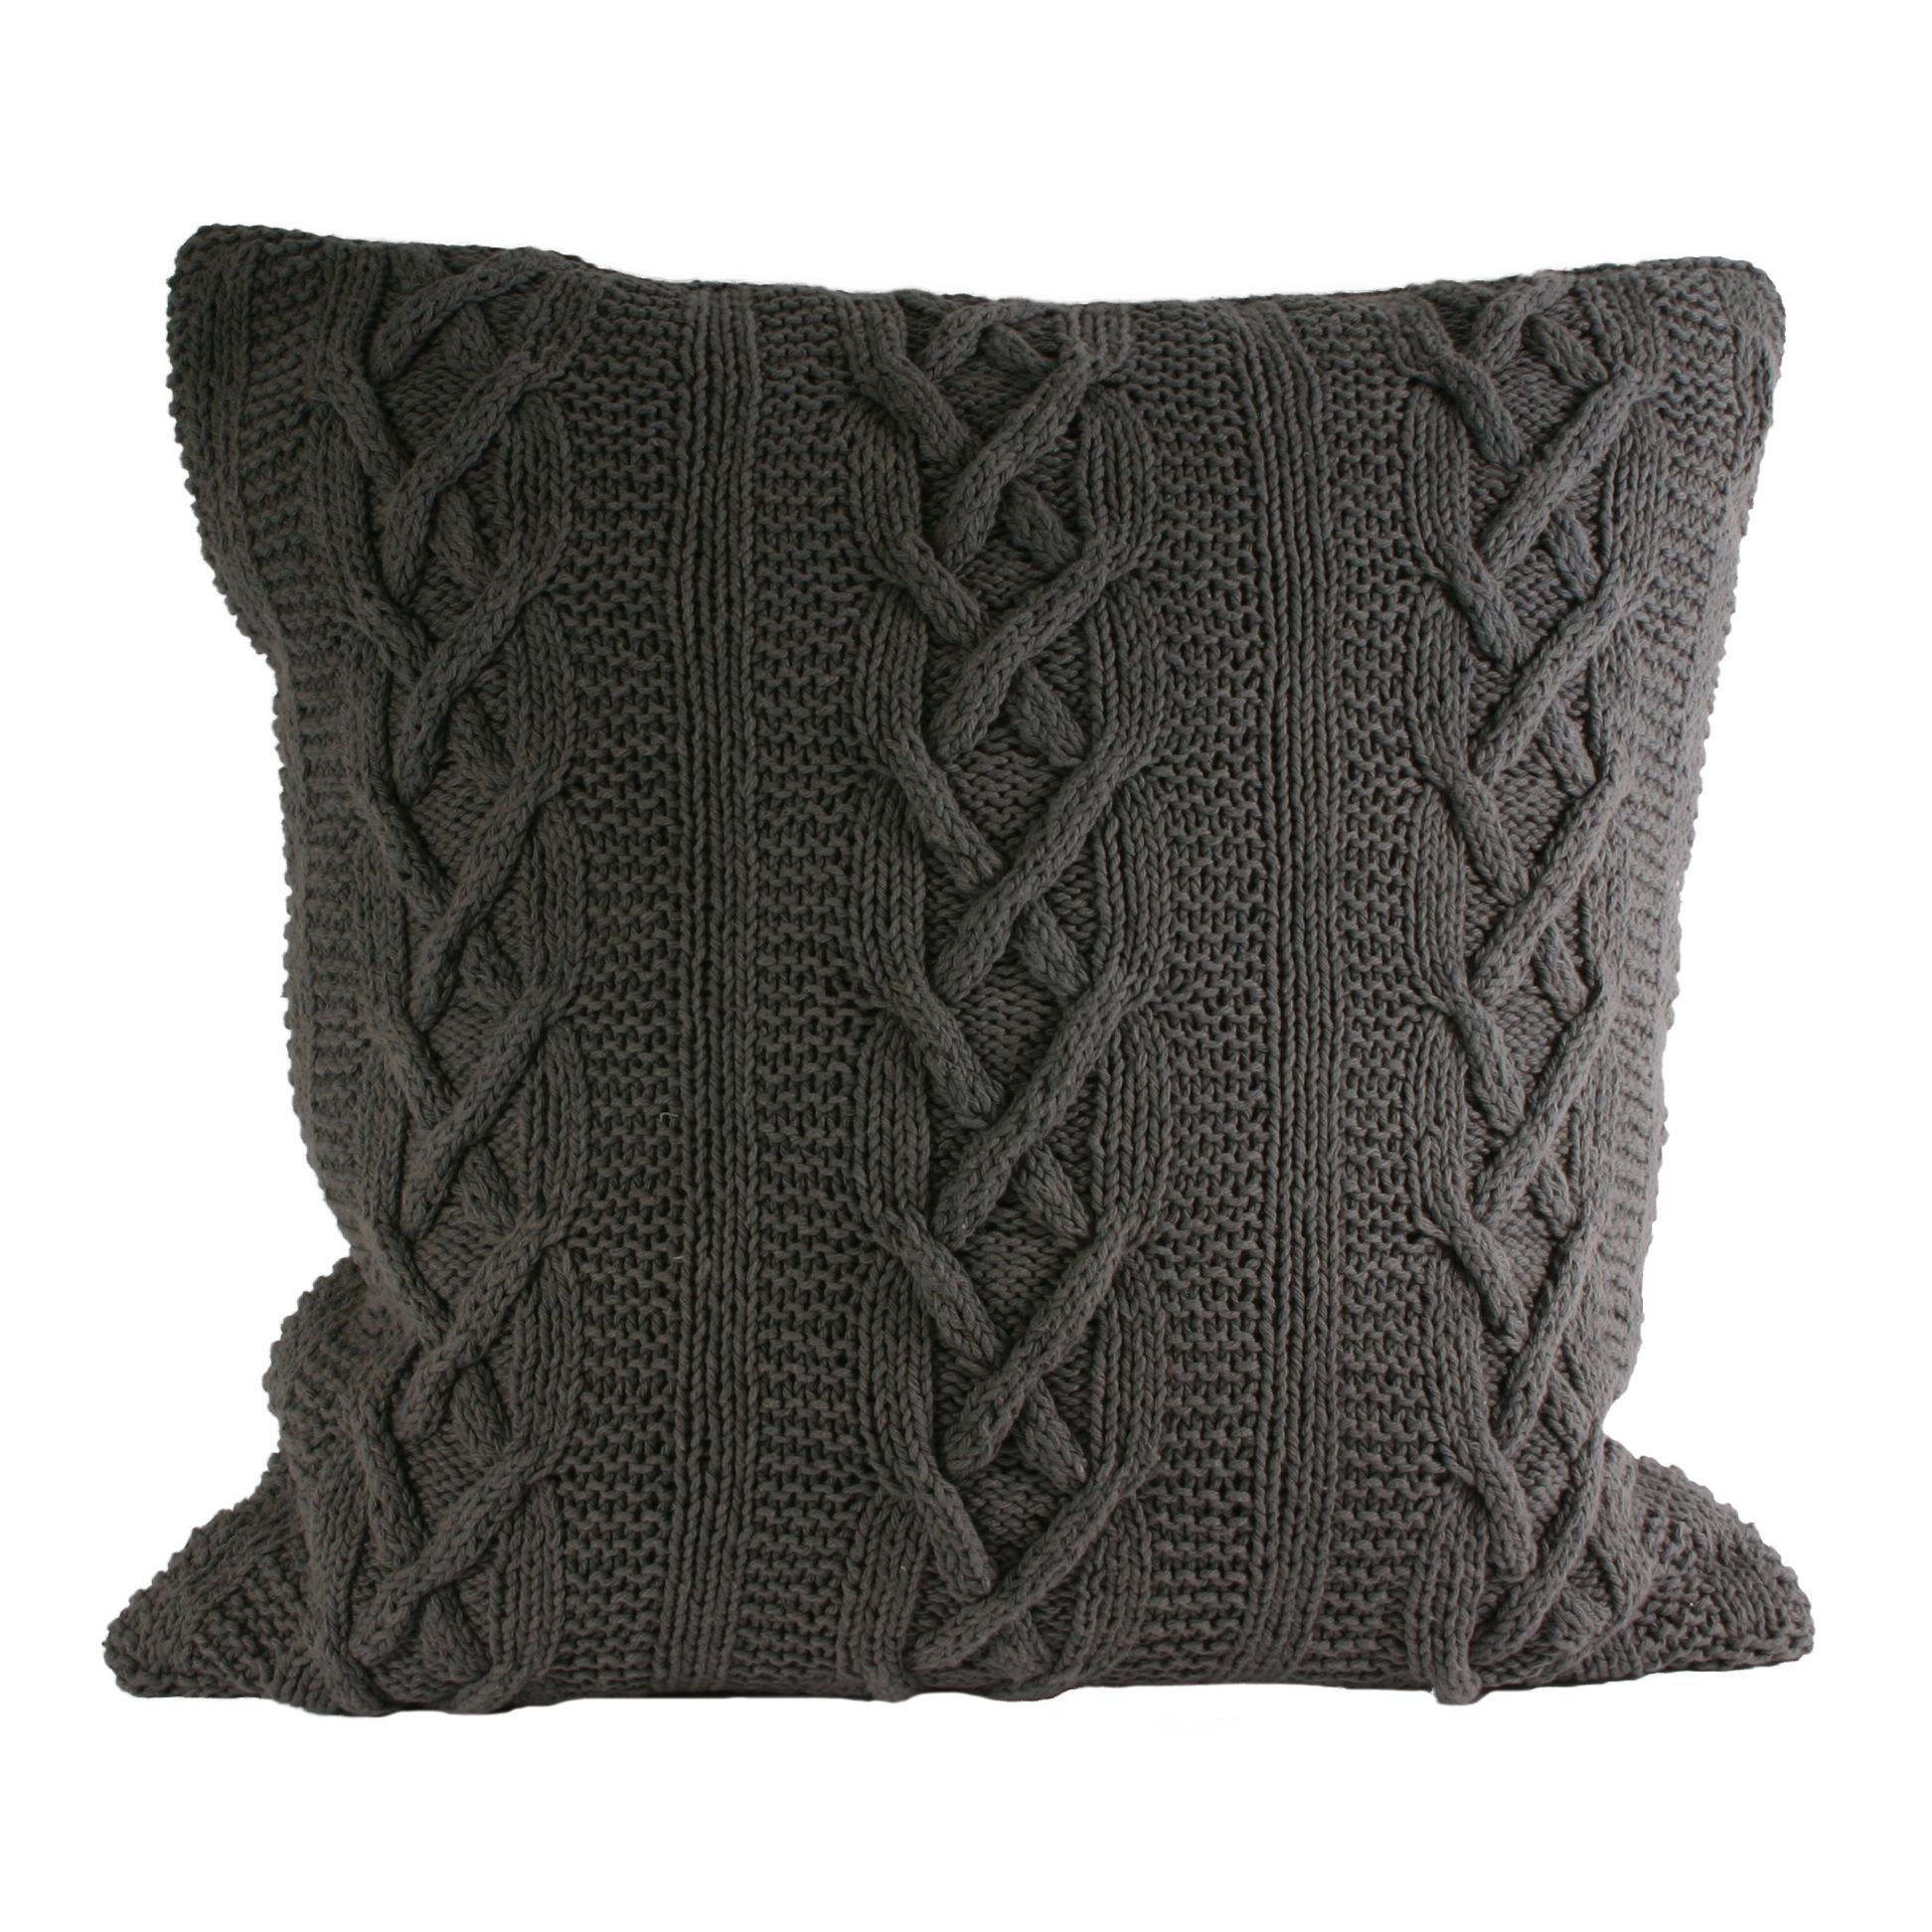 The Aran Polyester Filled Cushion is a modern interpretation of a classic look. This gorgeous cushion features a chunky, cable knit design that adds unique textures to your home interior, bringing a traditional twist into a modern setting or matching a cottage-style theme. With a hidden zip design this cushion will not catch and has a plain grey reverse. Thanks to its 100% cotton weave this Polyester Filled Cushion is super soft to touch making it great for beds. It must be hand washed only and laid flat to dry. Made to match with the Aran cable knit throws in corresponding natural colours.